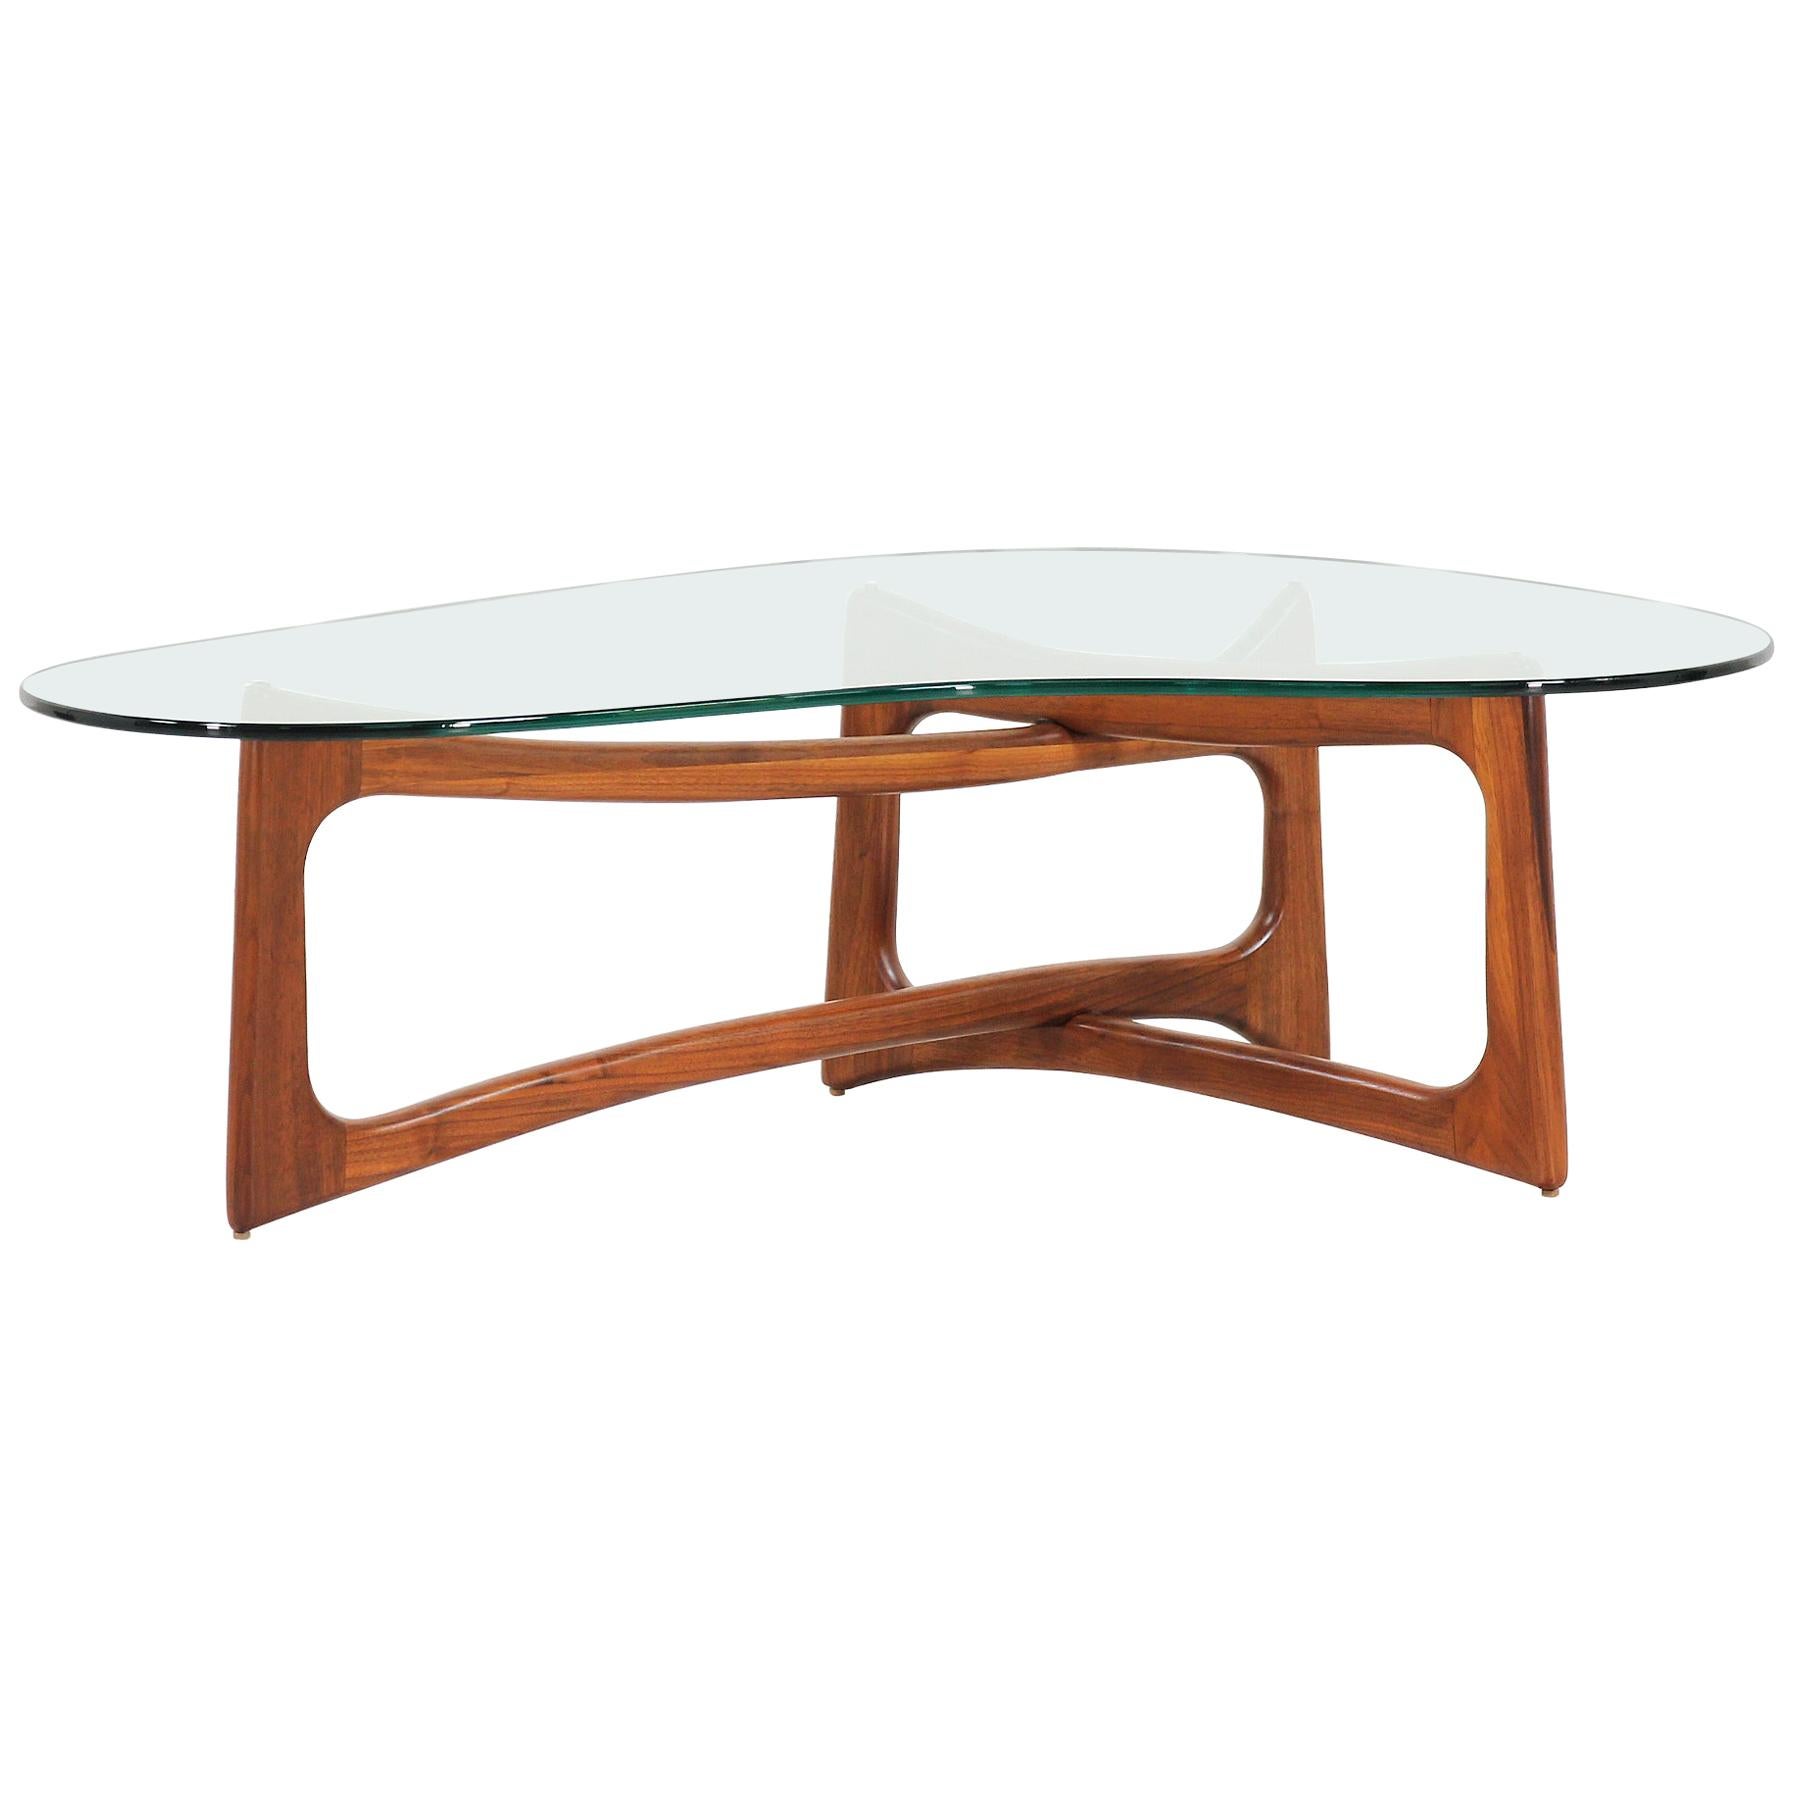 Adrian Pearsall Coffee Table 2450-TK Coffee Table for Craft Associates